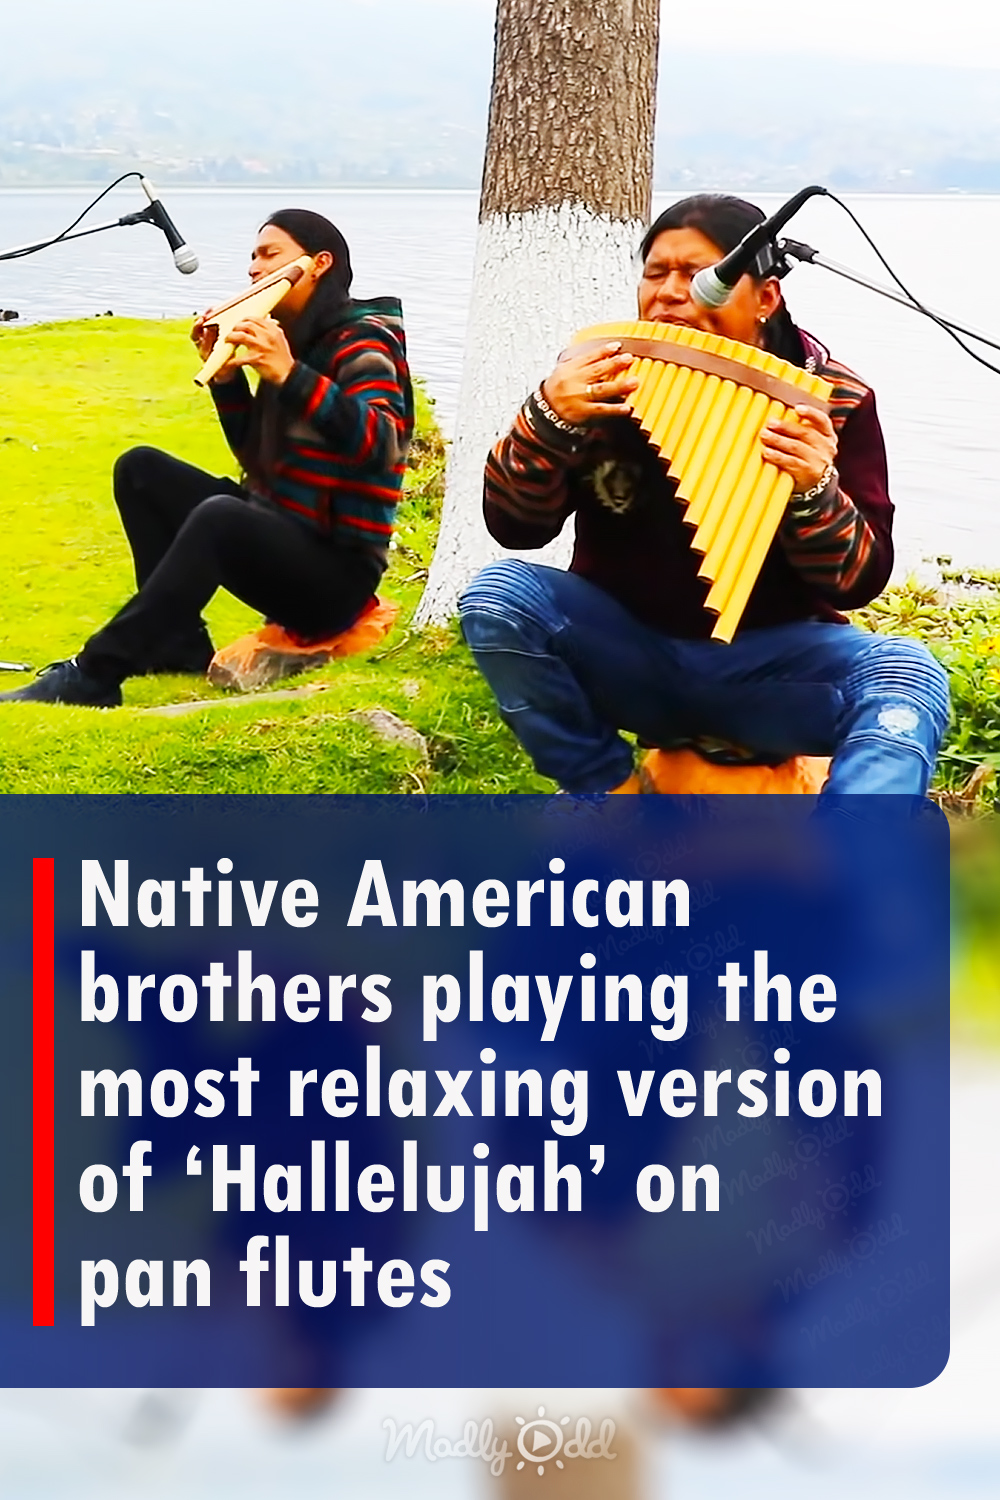 Native American brothers playing the most relaxing version of ‘Hallelujah’ on pan flutes